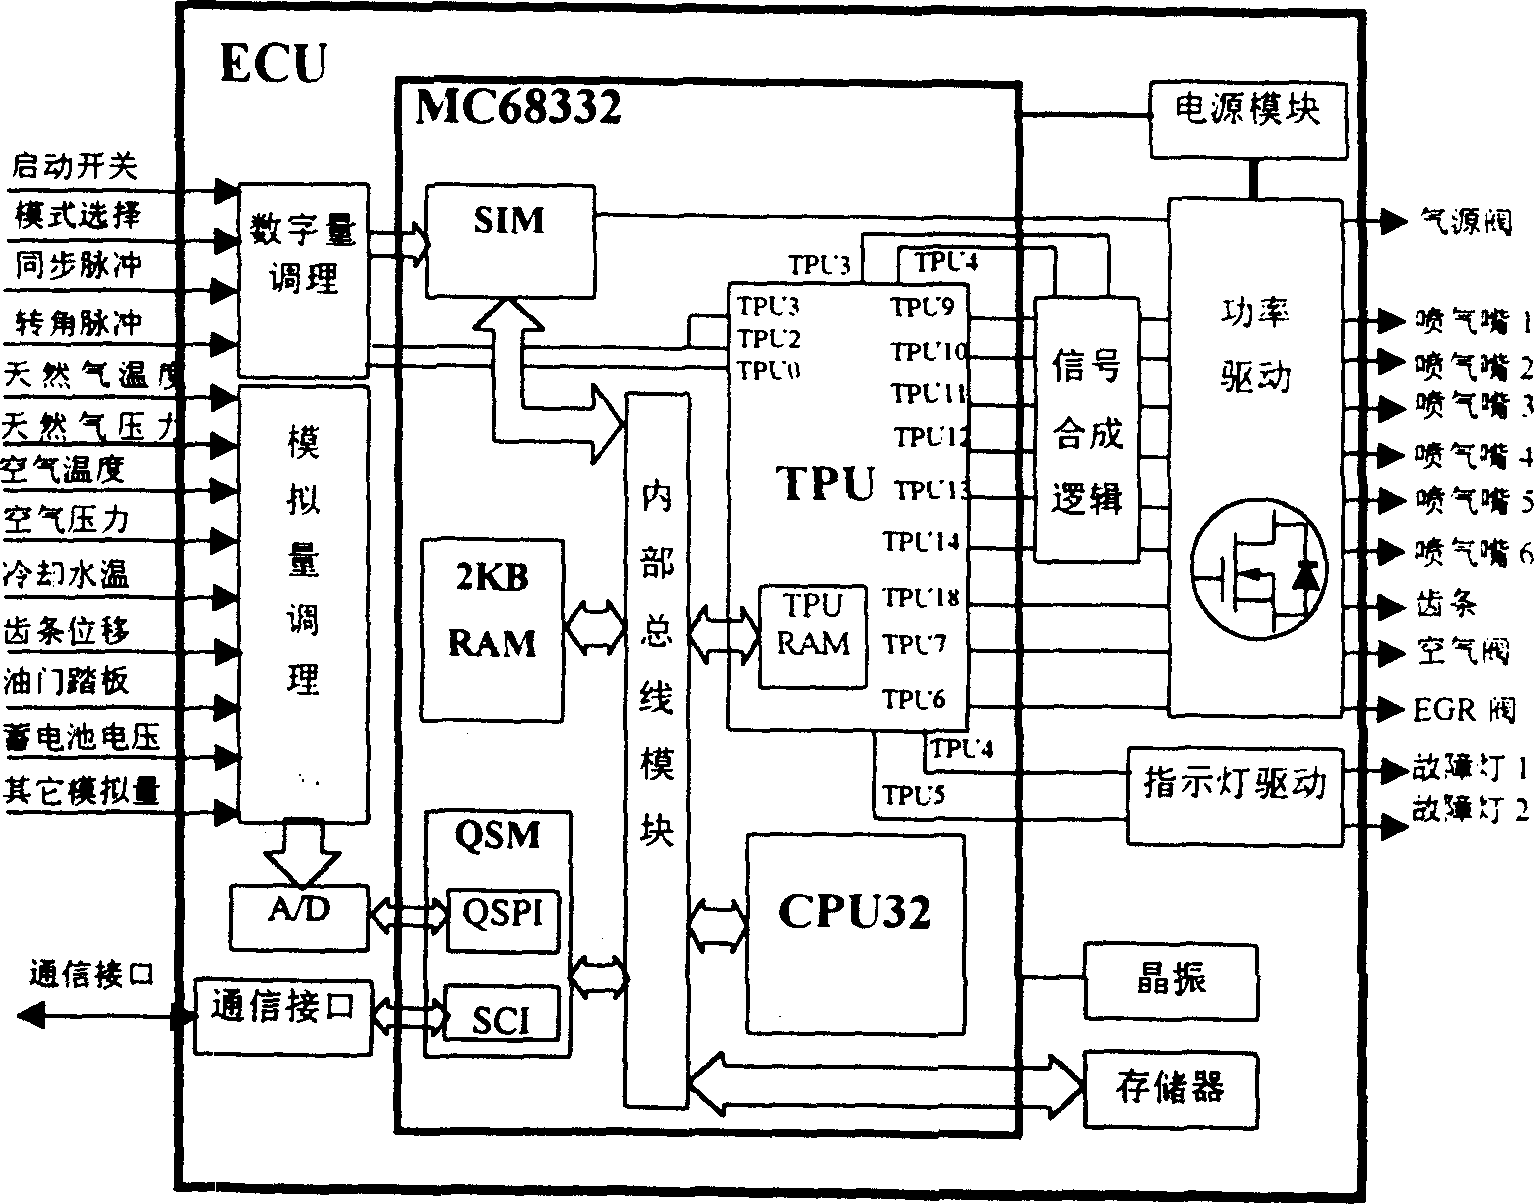 Thin-combustion, port-sequence-injection, fully electric-controlled diesel/natural gas electronic control system for dual-fuel engine